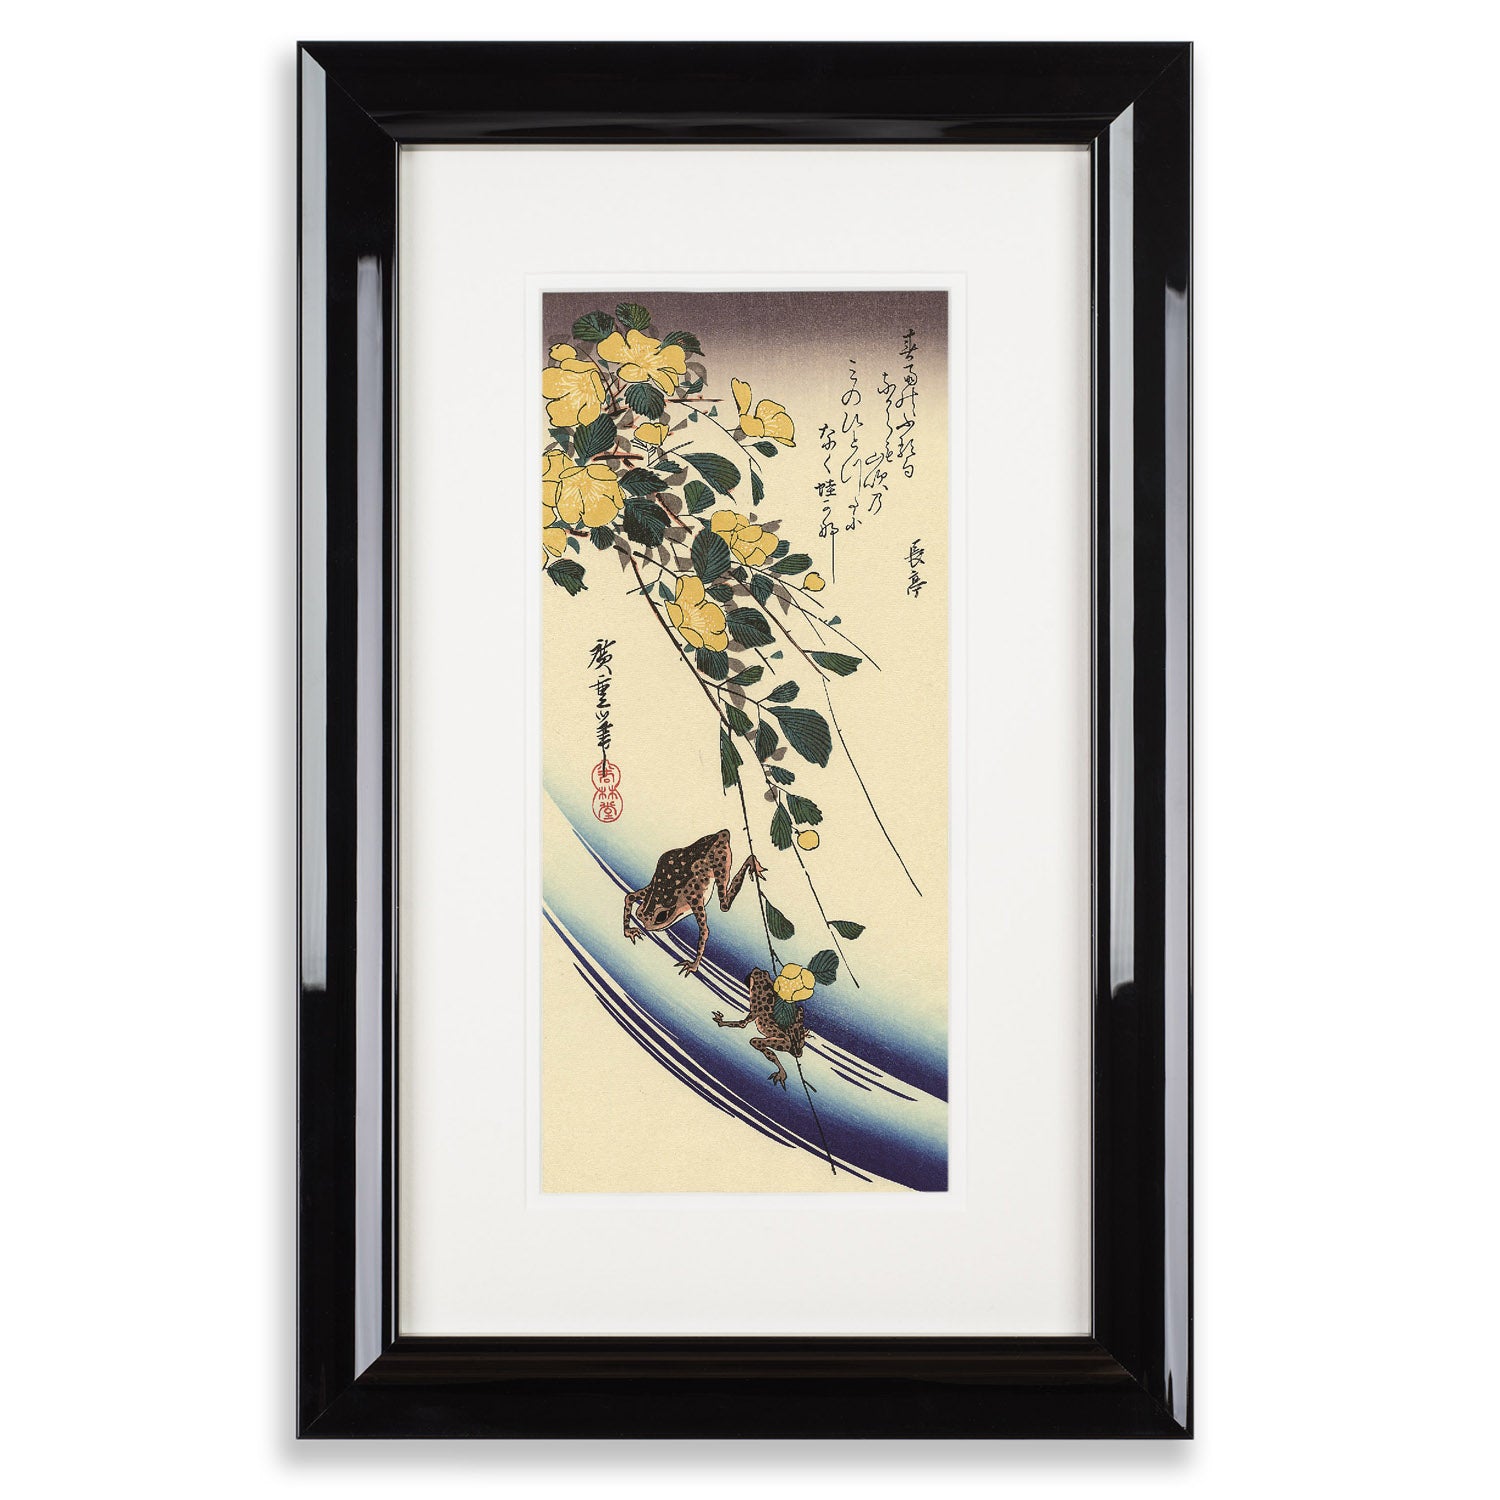 Framed Yellow Rose and Frogs Hiroshige Woodblock Print